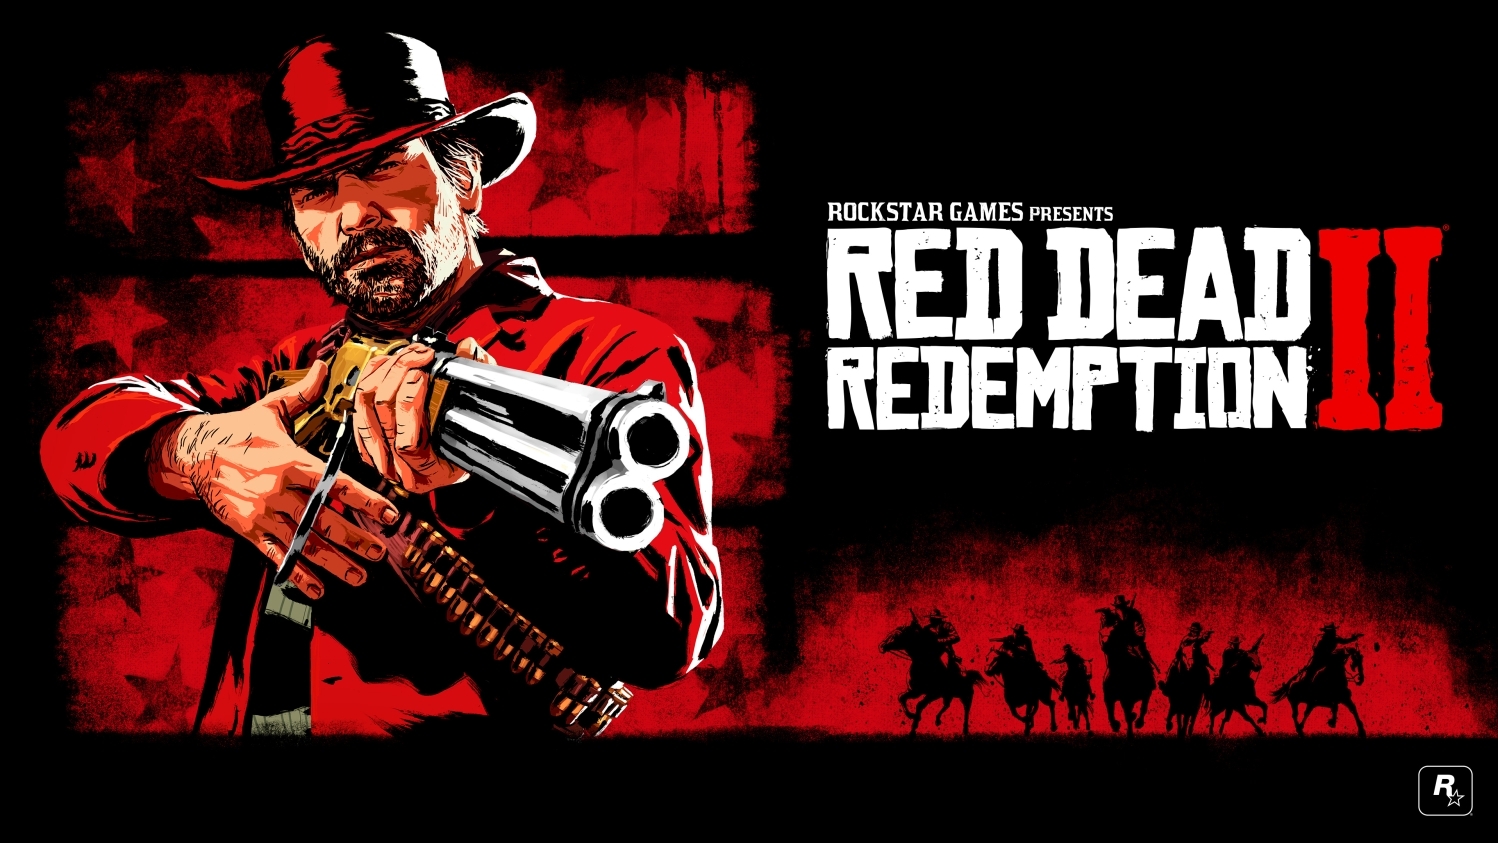 For a moment, Red Dead Redemption 2 on Xbox One was at 99 Metacritic score  with 22 reviews. Tied with Ocarina of Time with 22 reviews for being the  highest rated on Metacritic. : r/reddeadredemption